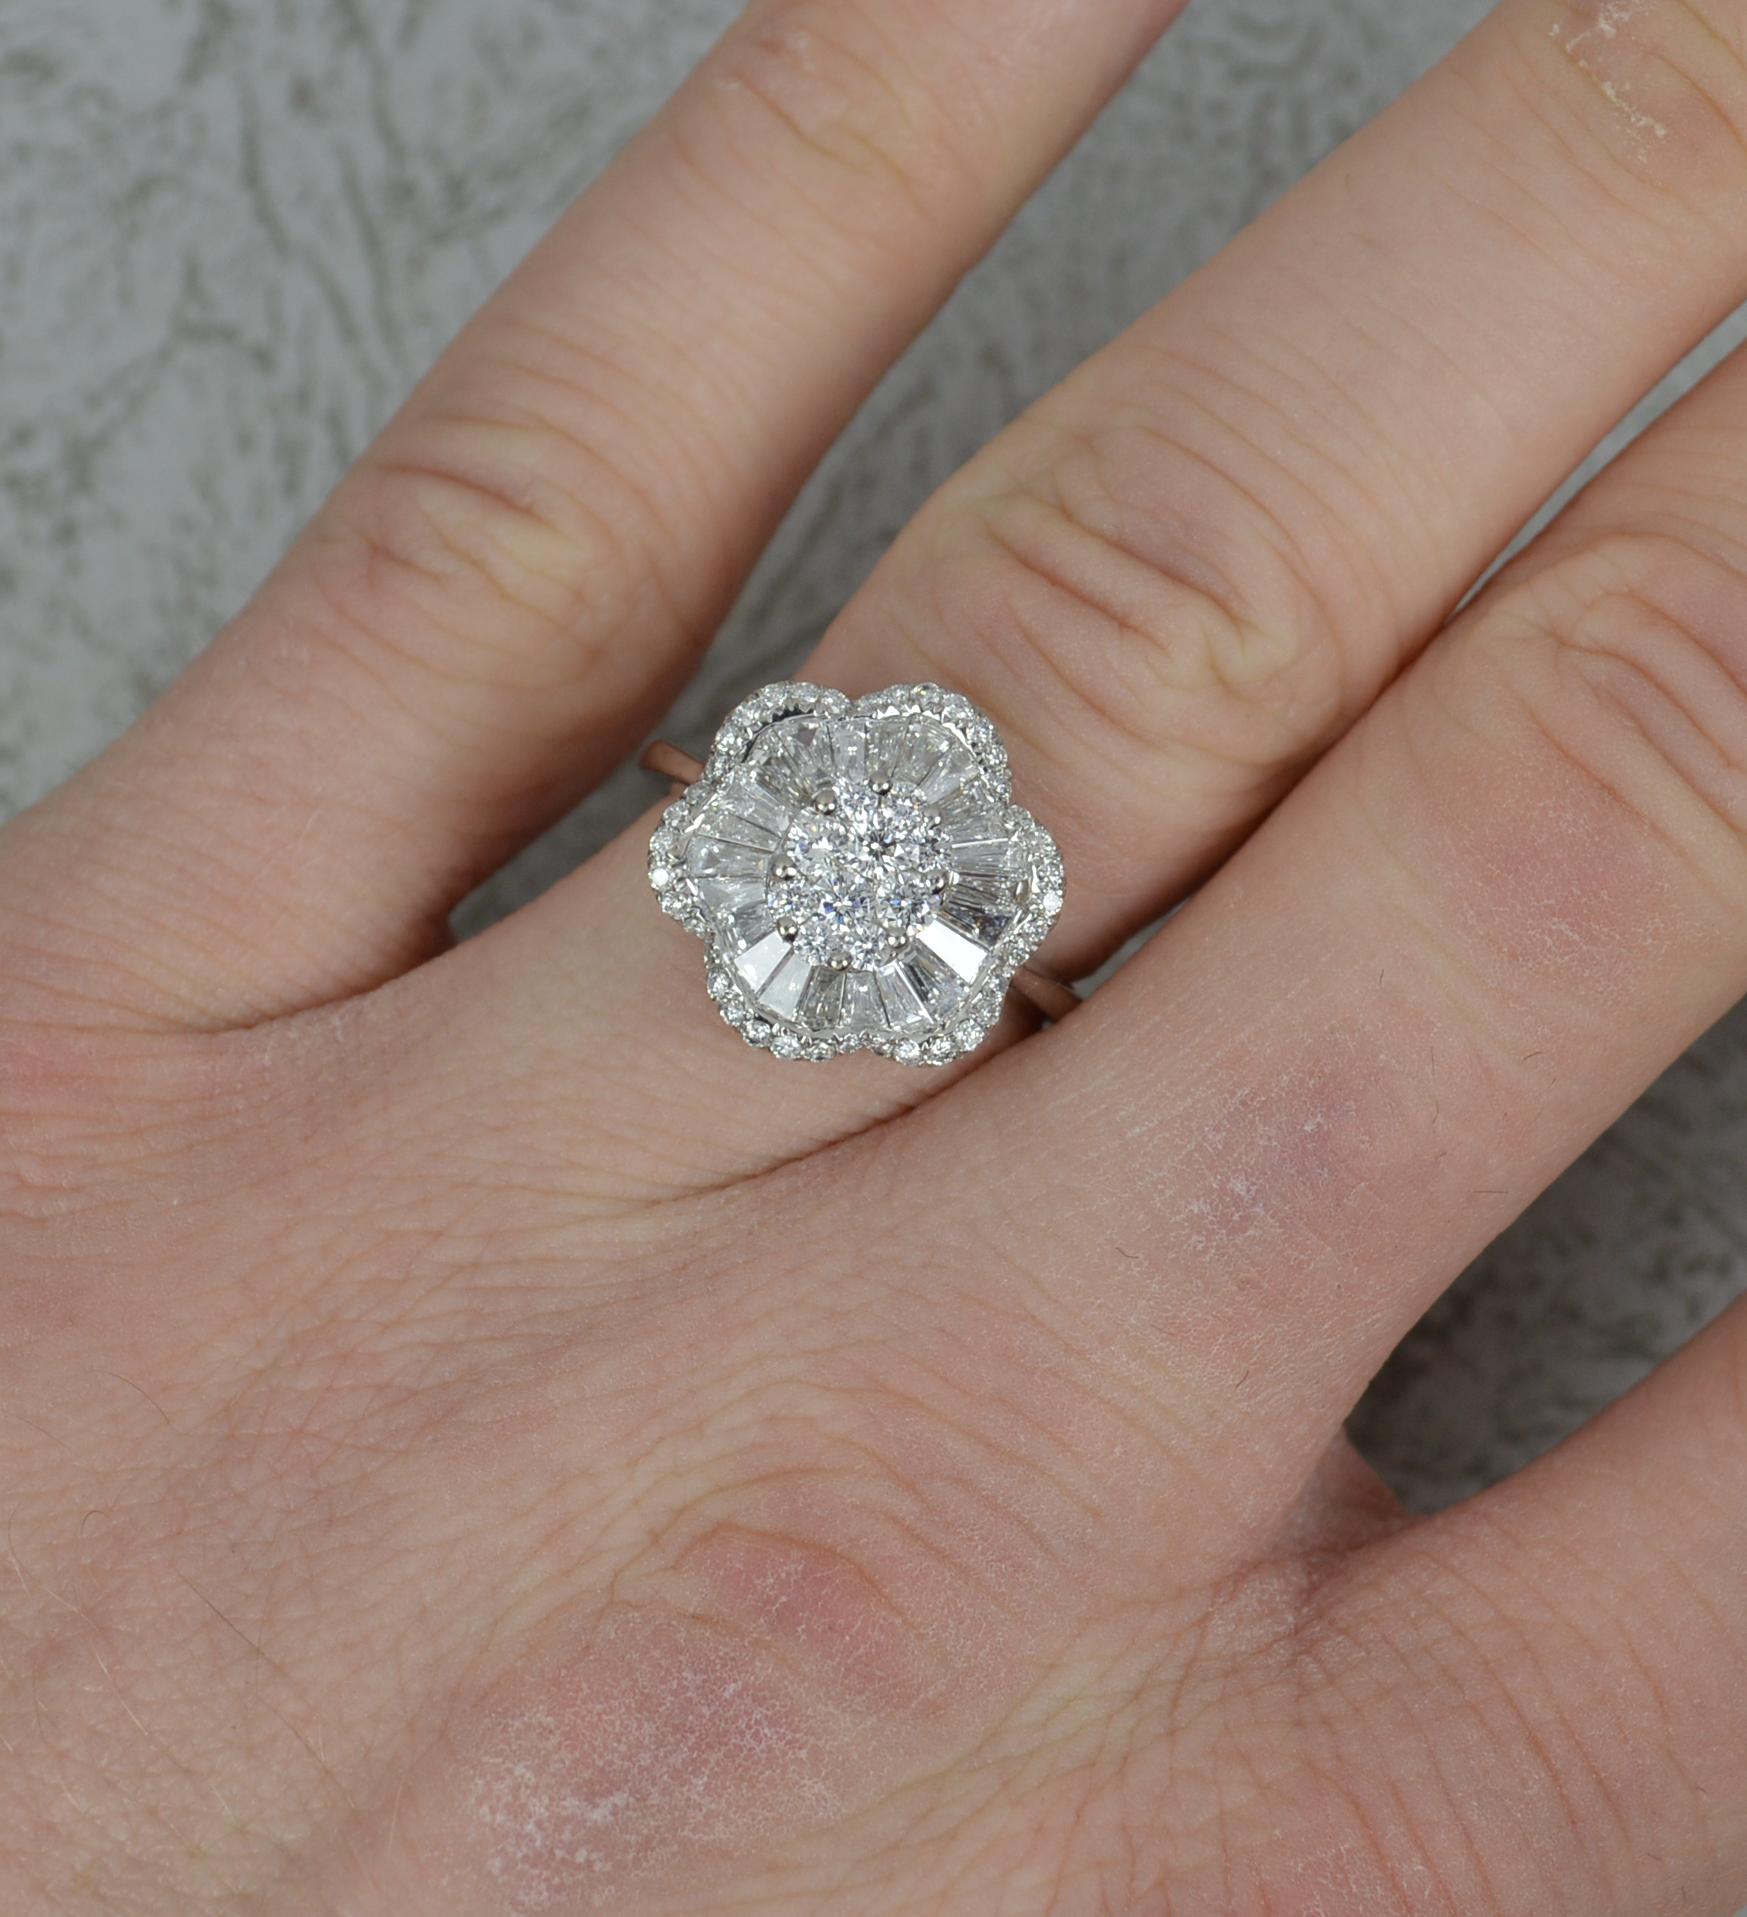 
A very striking diamond cluster ring.

Solid 18 carat white gold example.

Flower head shape cluster ring comprising of round brilliant and tapered baguette cut diamonds. Vs clarity, f-g colour. 1.75 carats total.

14mm x 15mm cluster